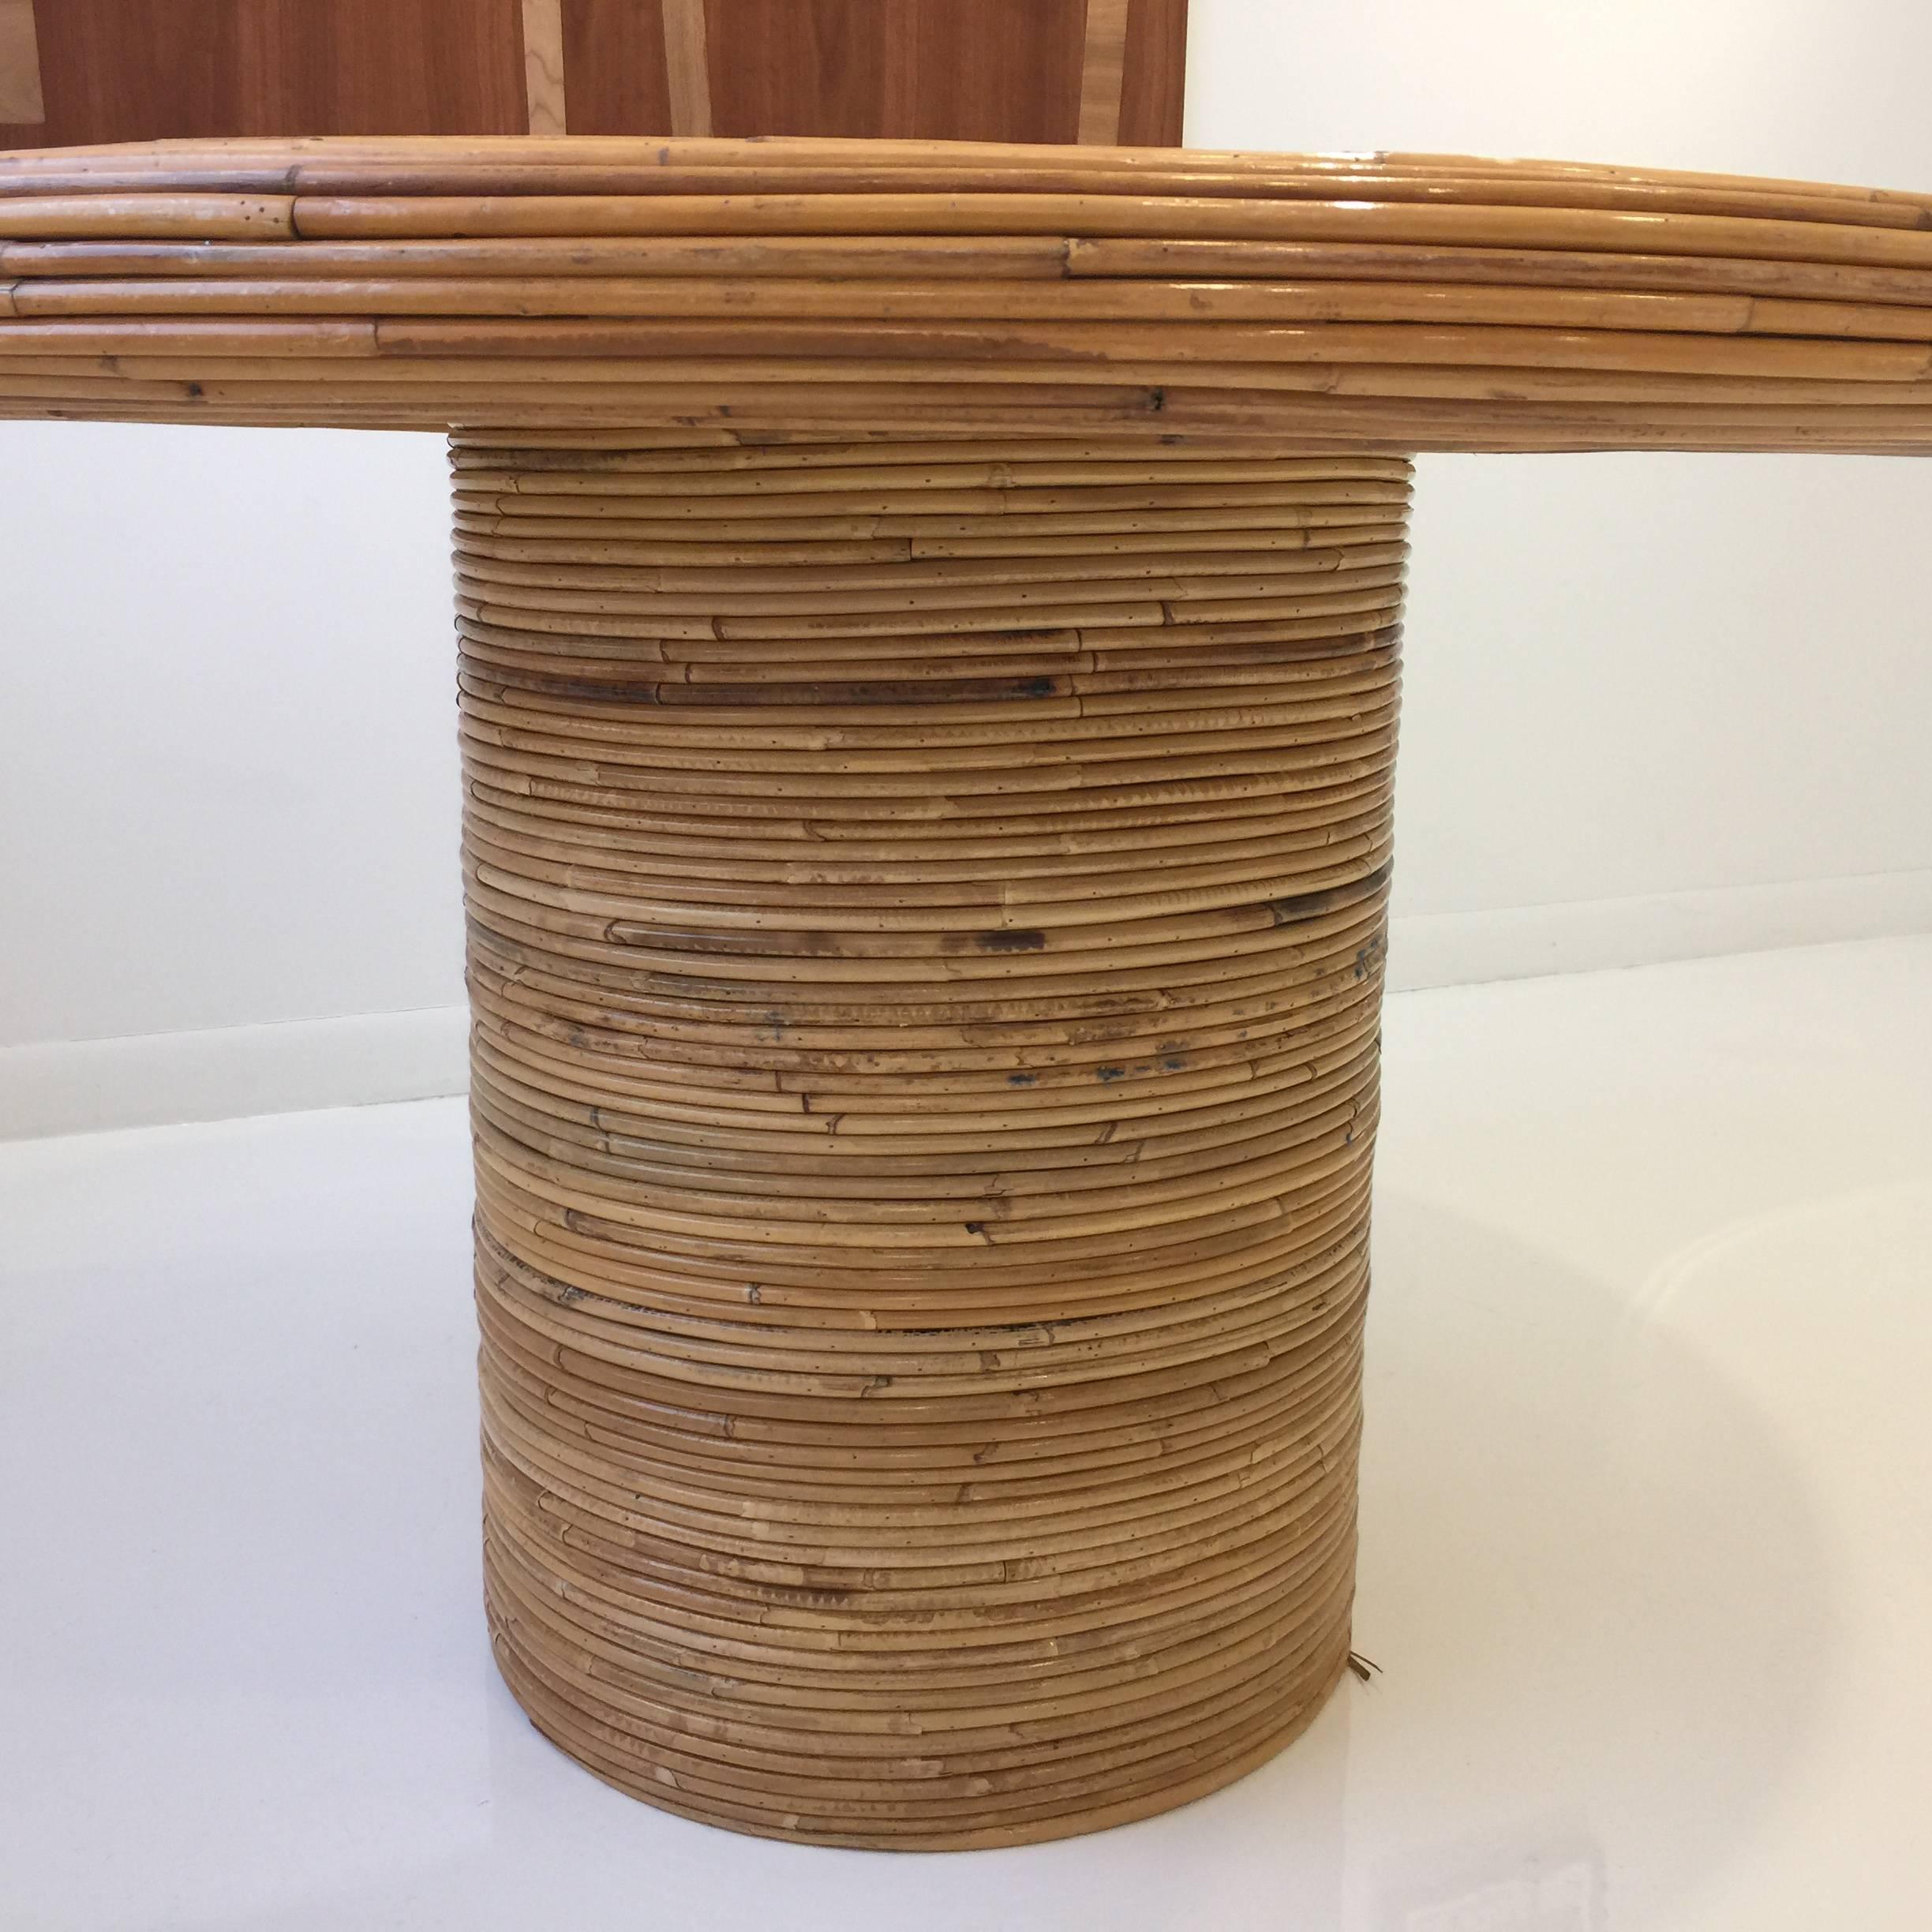 A unique rattan dining table by Henry Olko for Willow and Reed, signed and dated 1978. Black glass sits atop a thick cylindrical base.